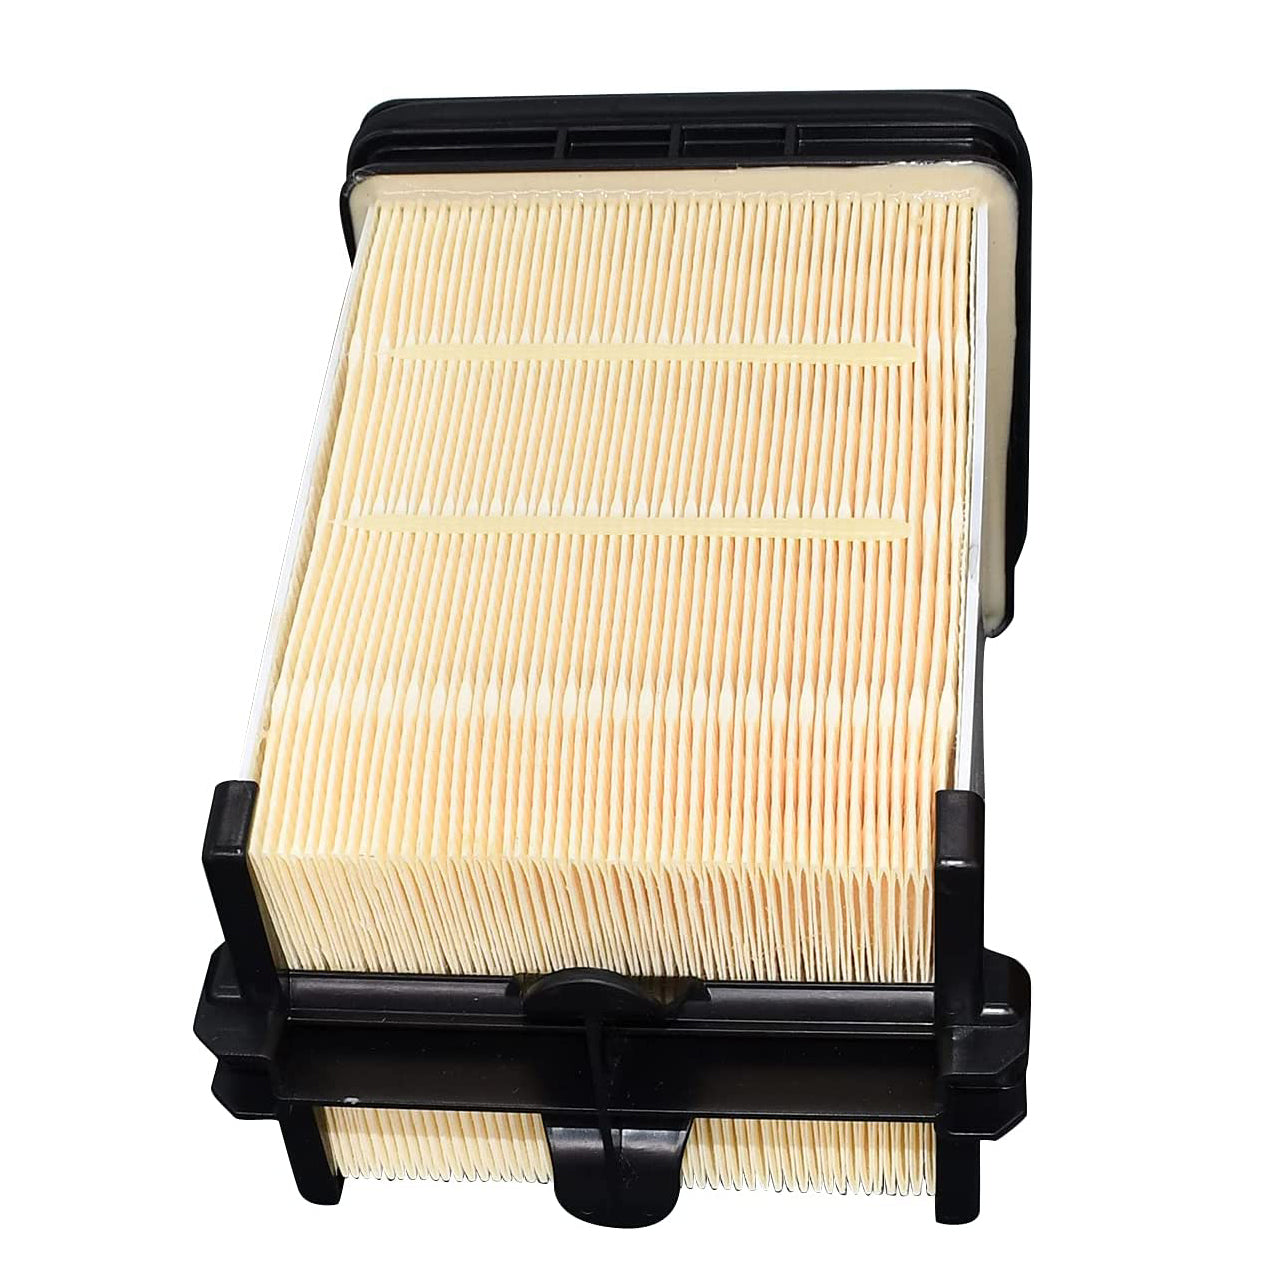 New 7221934 7286322 Air Filter Kit Compatible with Bobcat T450 T550 T590 T595 T630 T650 T870